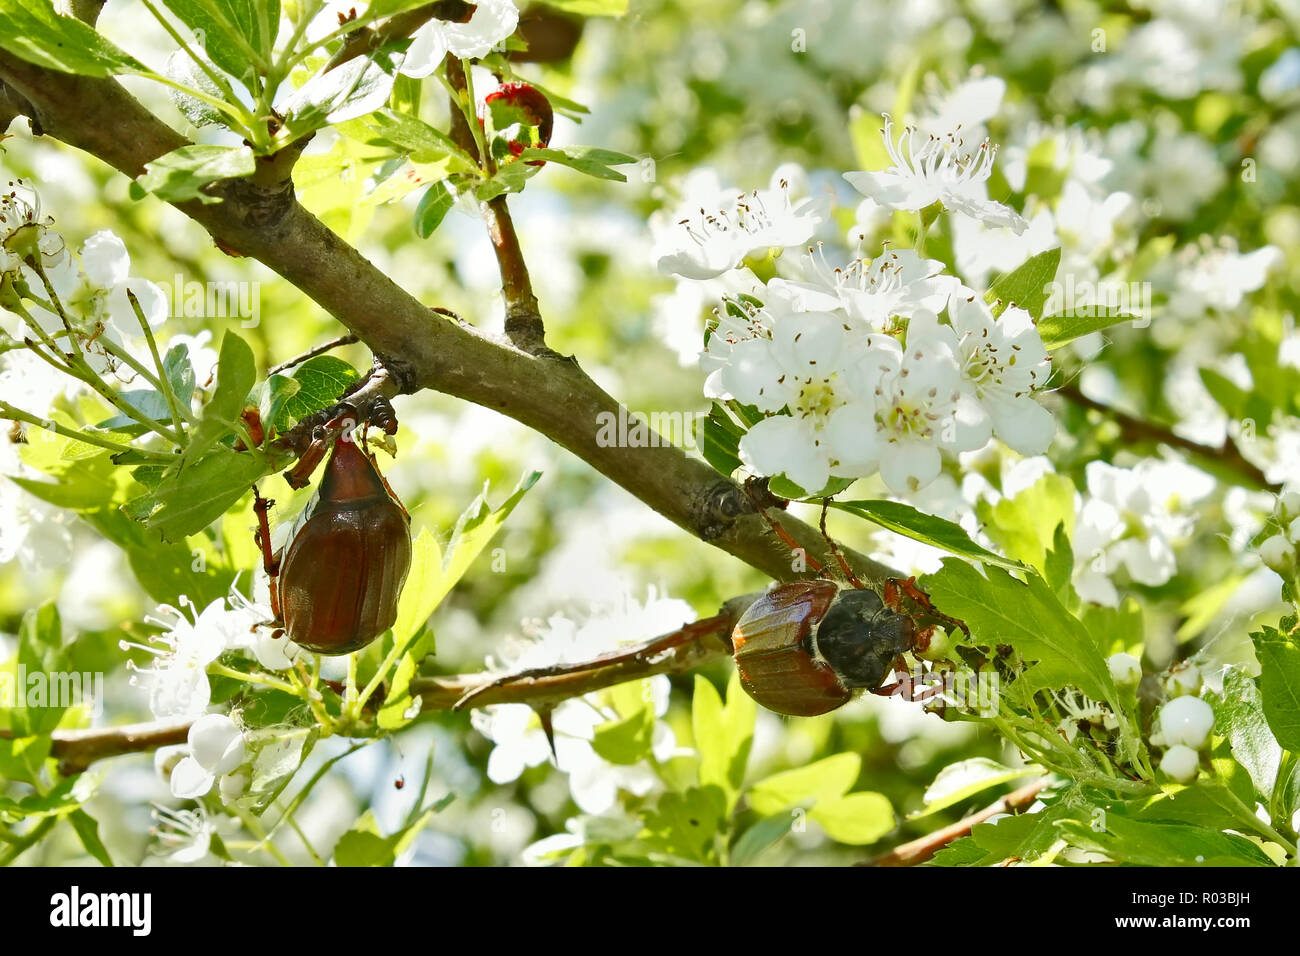 European chafer beetles eating the leaves and flowers of hawthorn tree Stock Photo